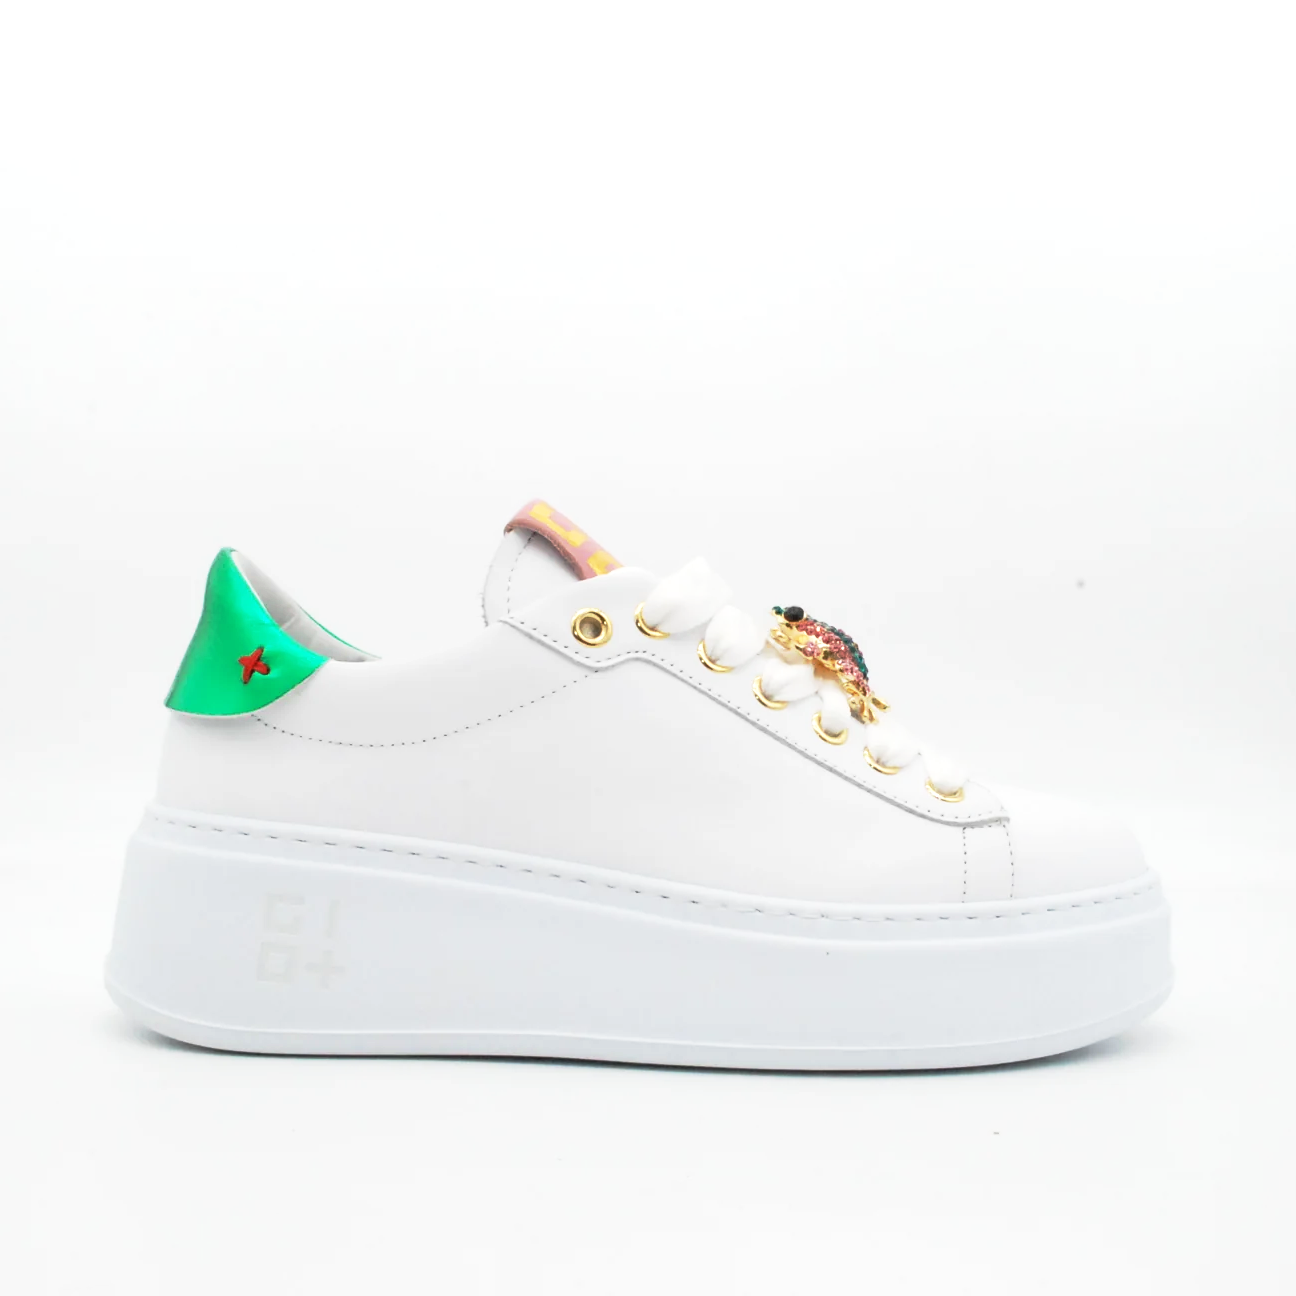 sneakers-gio-in-pelle-applicazione-rana-35-bianco-pelle-sneakers.png